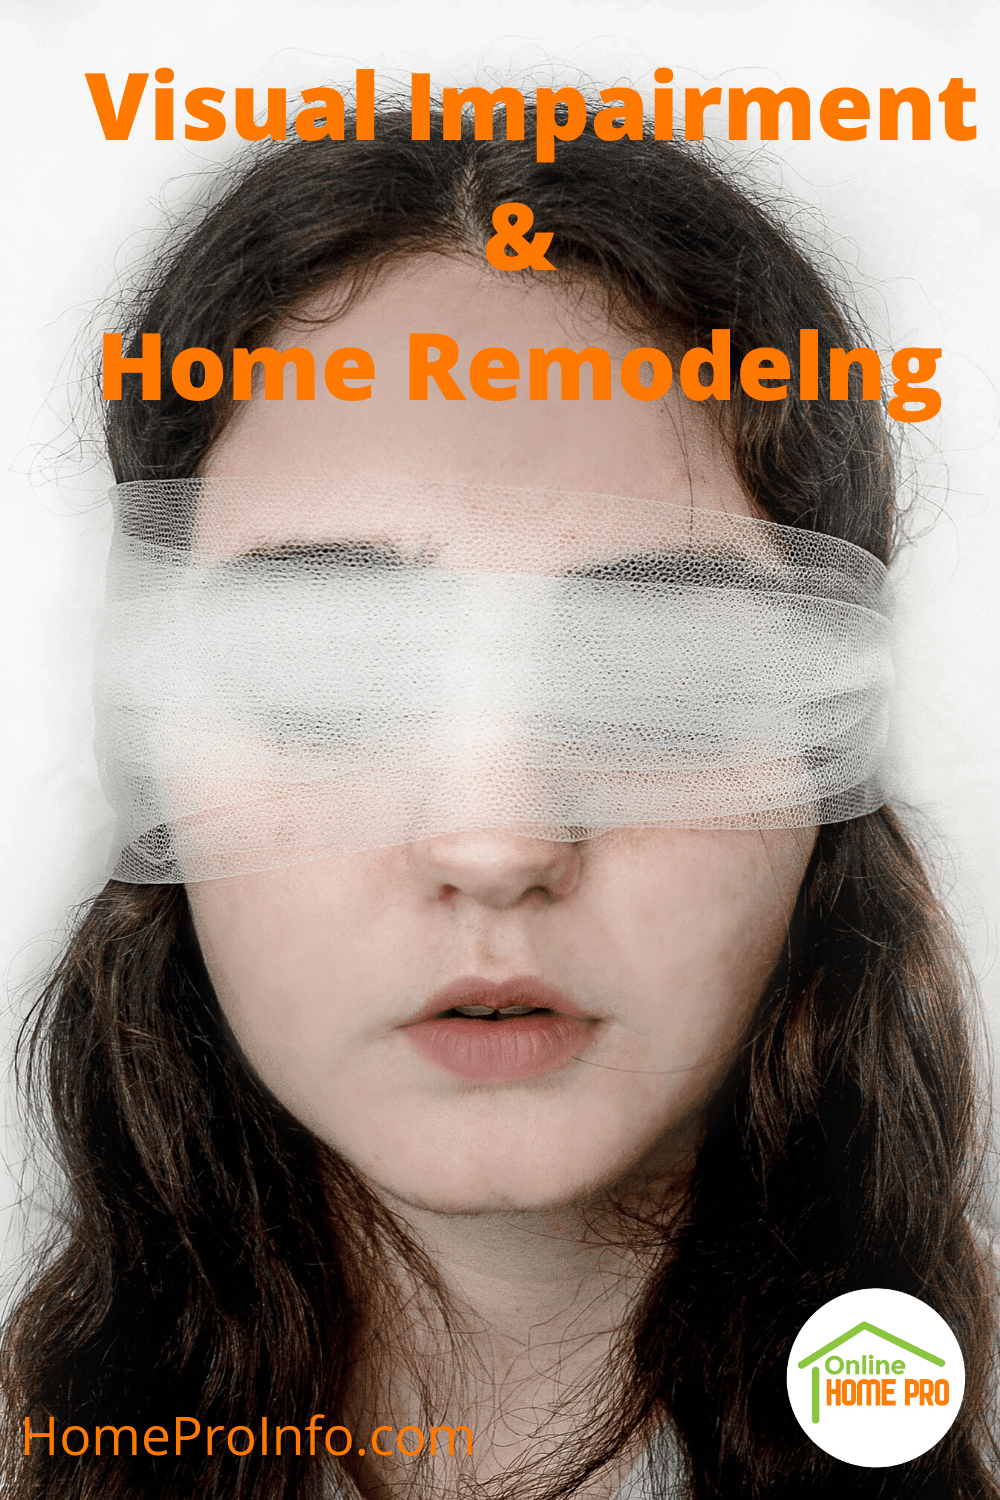 visual impairment & home remodeling